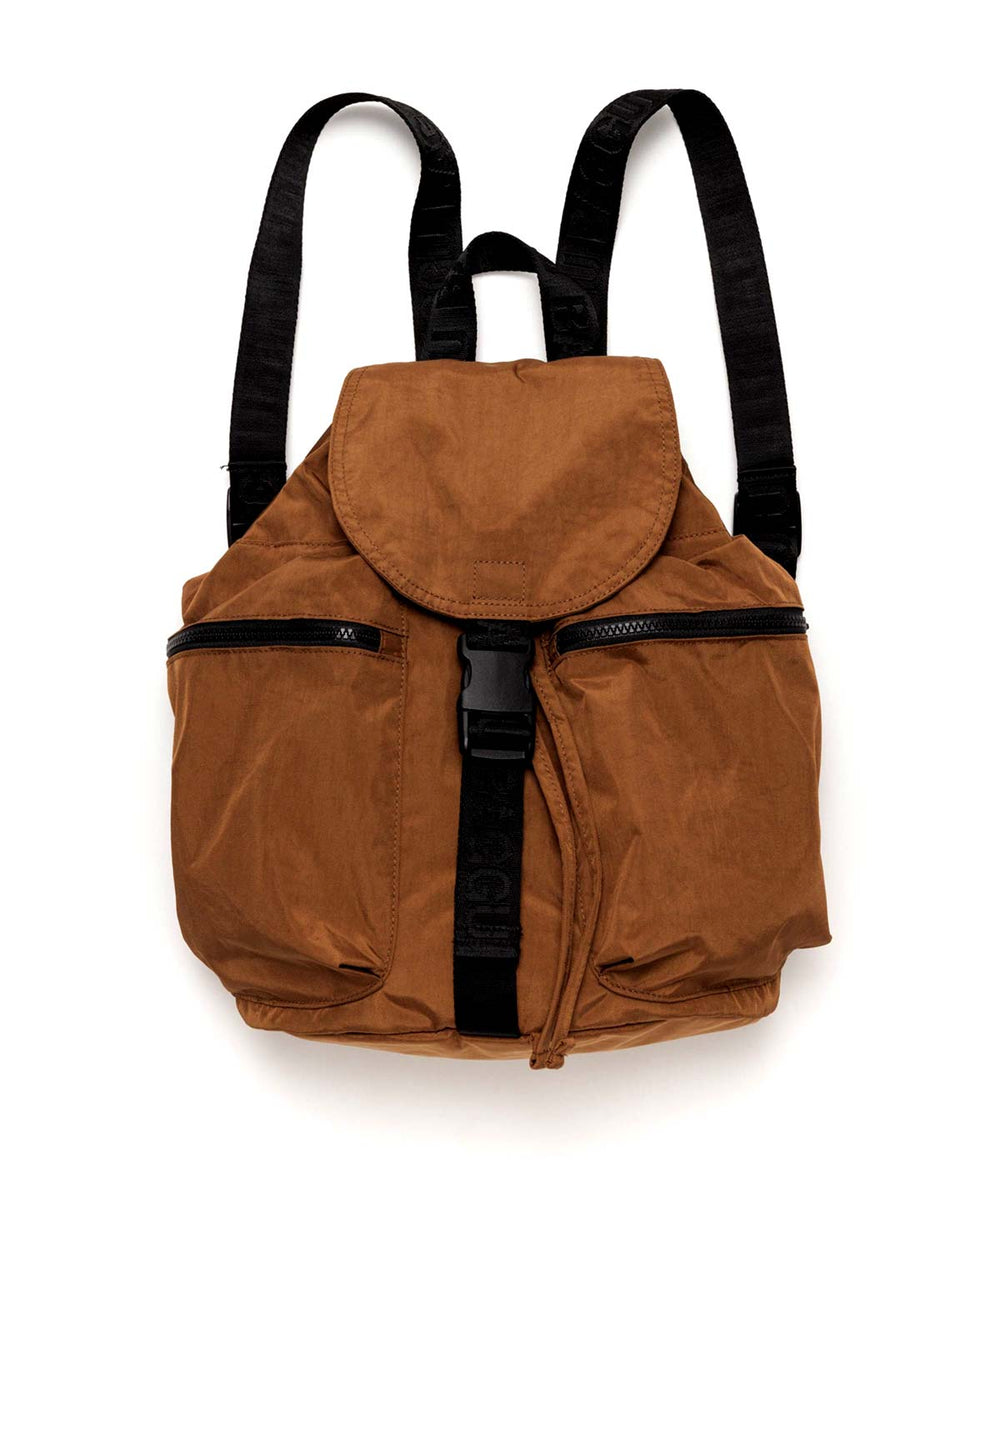 SMALL SPORT BACKPACK BROWN - Moeon